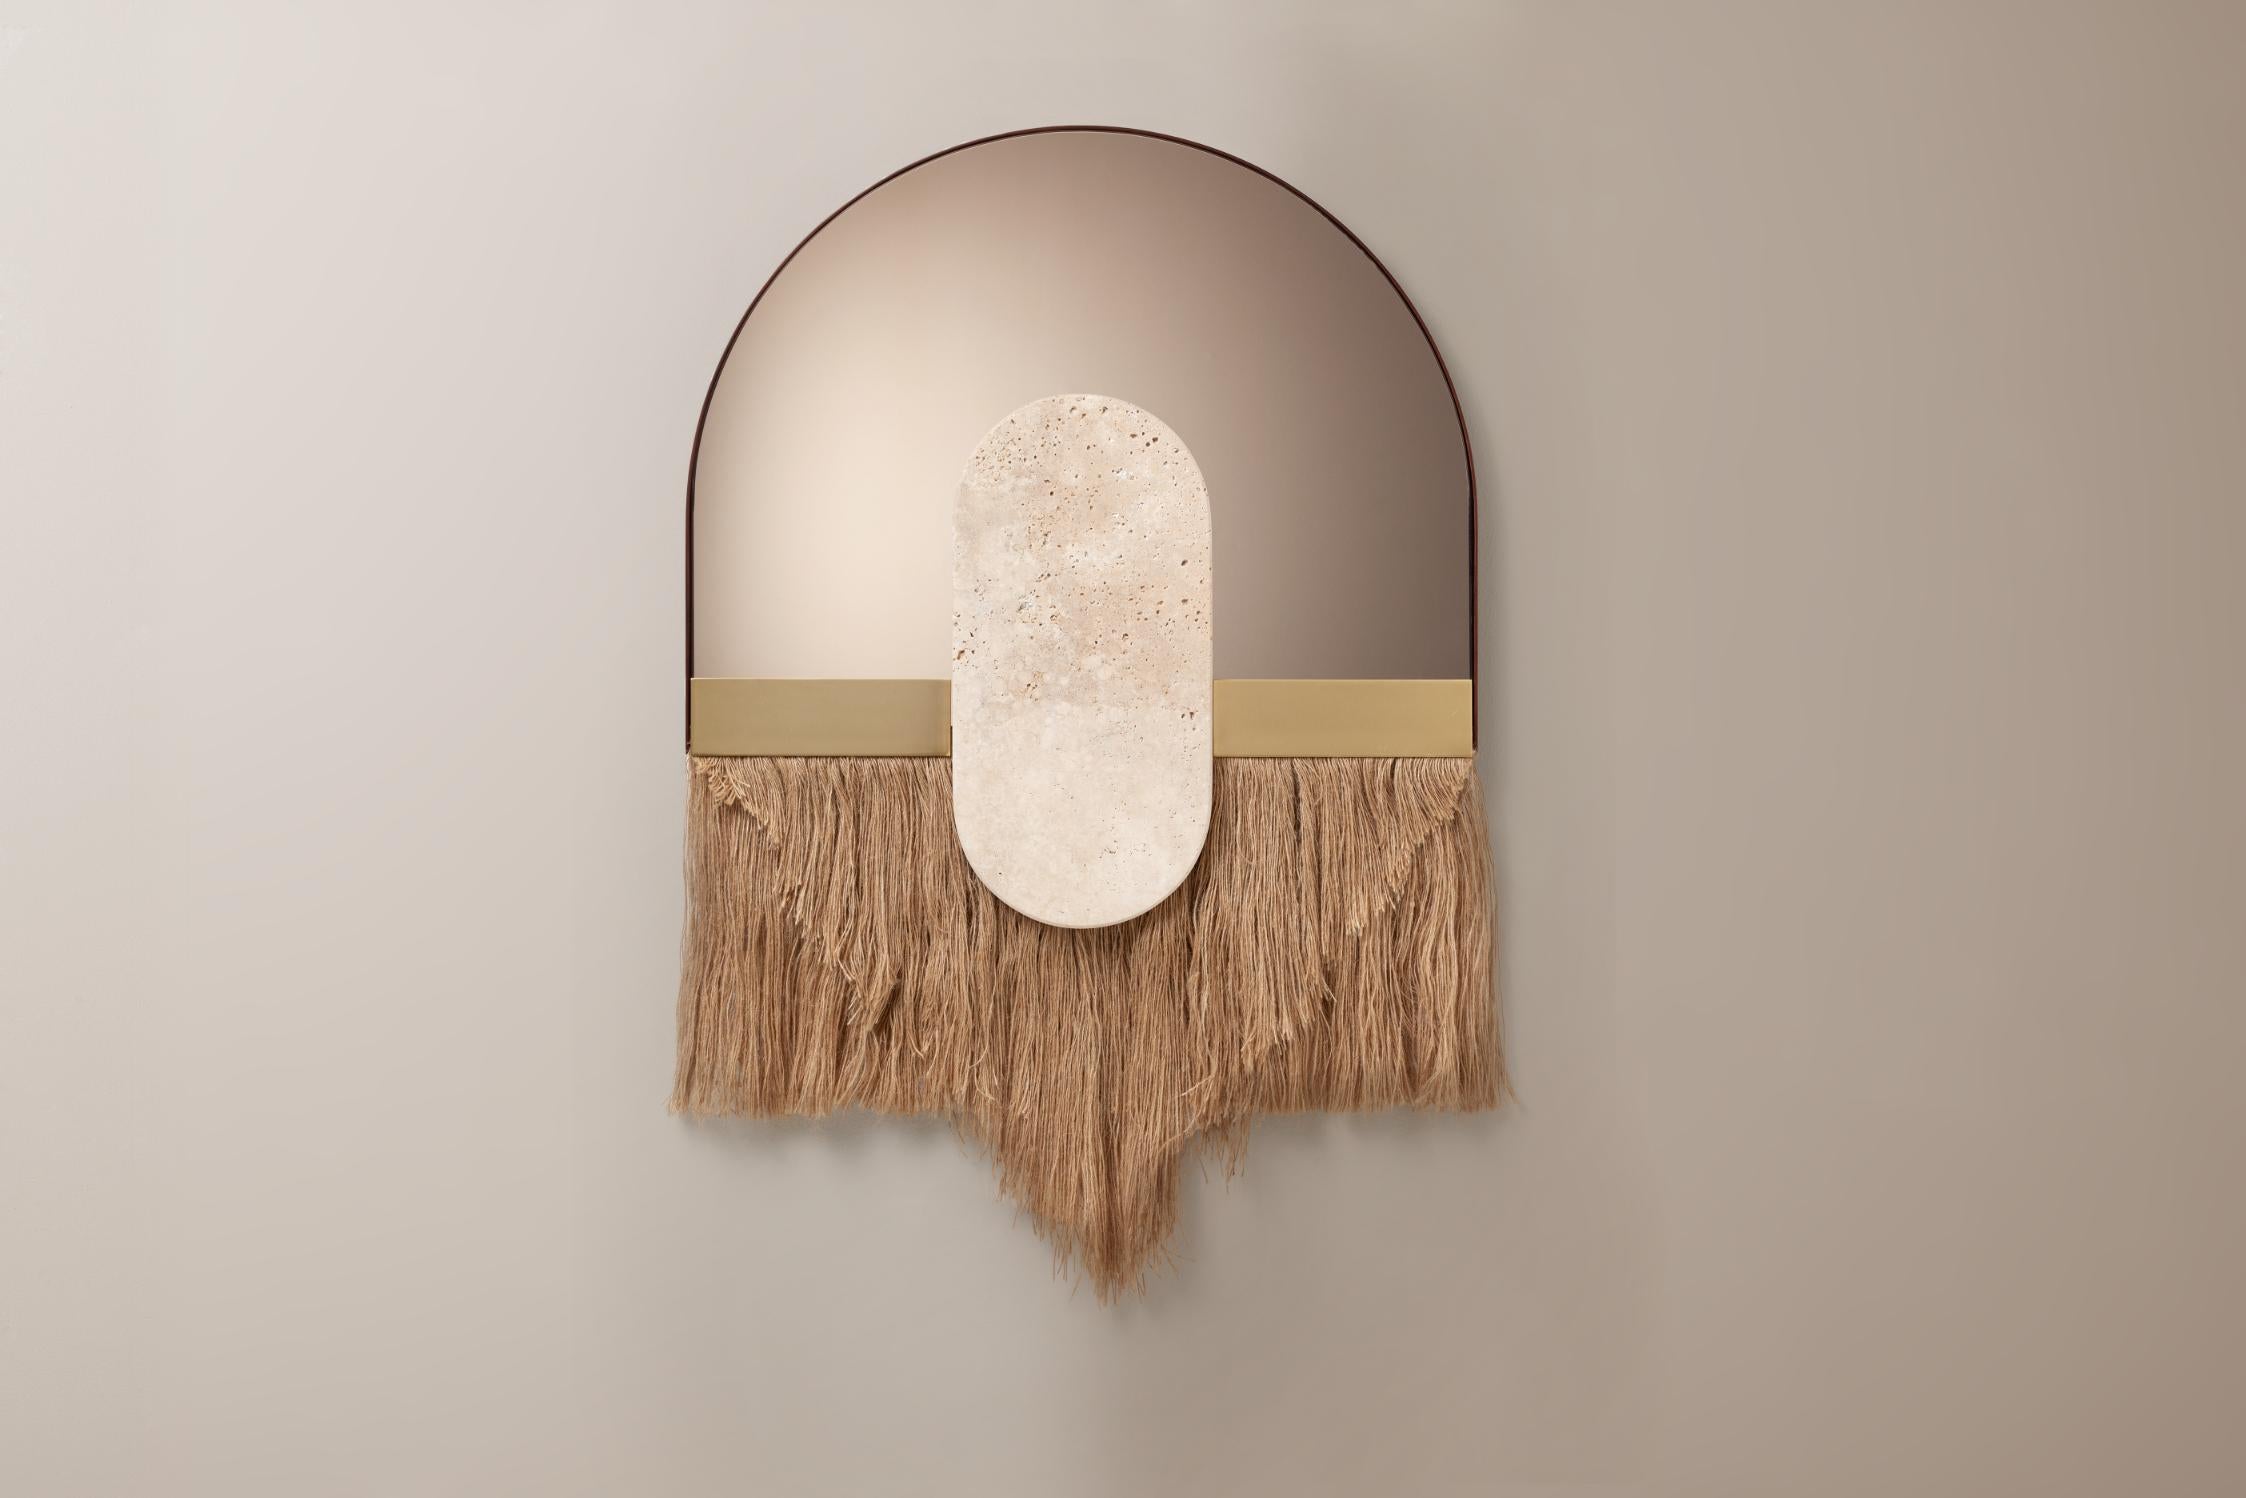 Soul Ecru cream mirror by Dooq
Dimensions: ø 30 x H 40 cm
Materials: Glass, marble.

Created by the perfect combination of color, energy and shape, Souk mirrors reflect the influences of overwhelming and visually fascinating Souk markets in